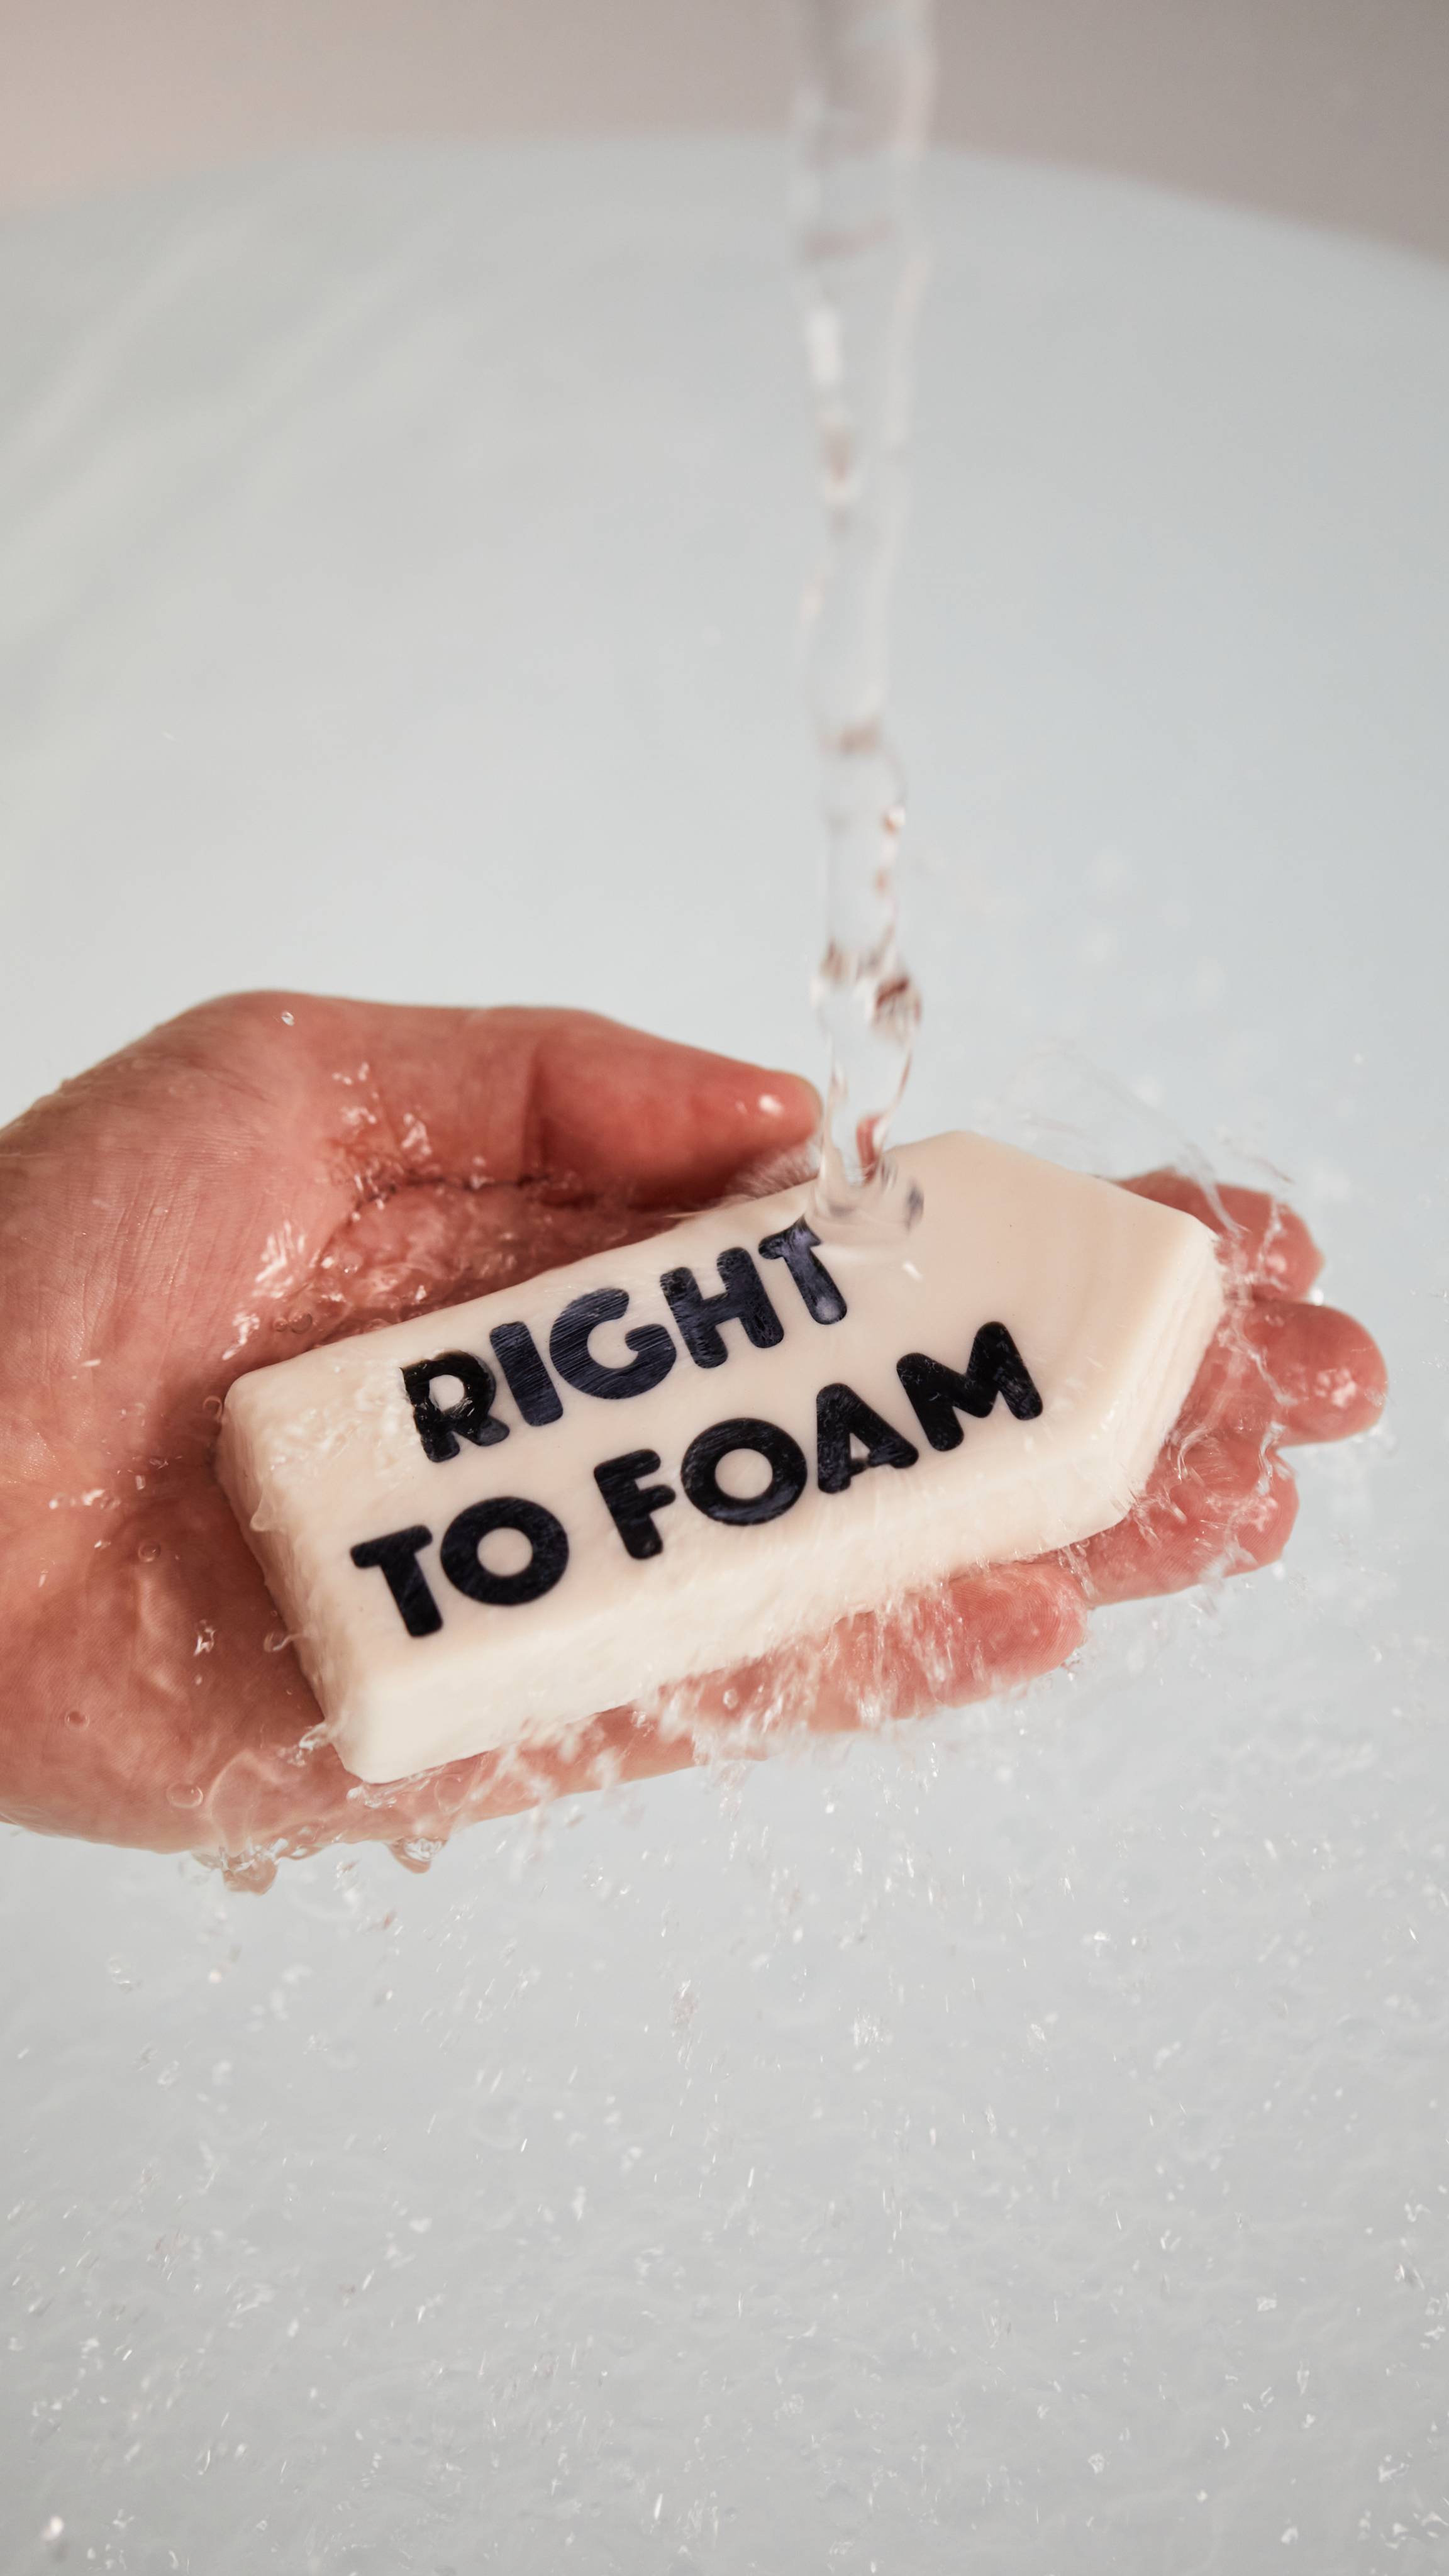 A close-up of the model's hand as they hold the white, sign-shaped, Right to Foam soap under running water.